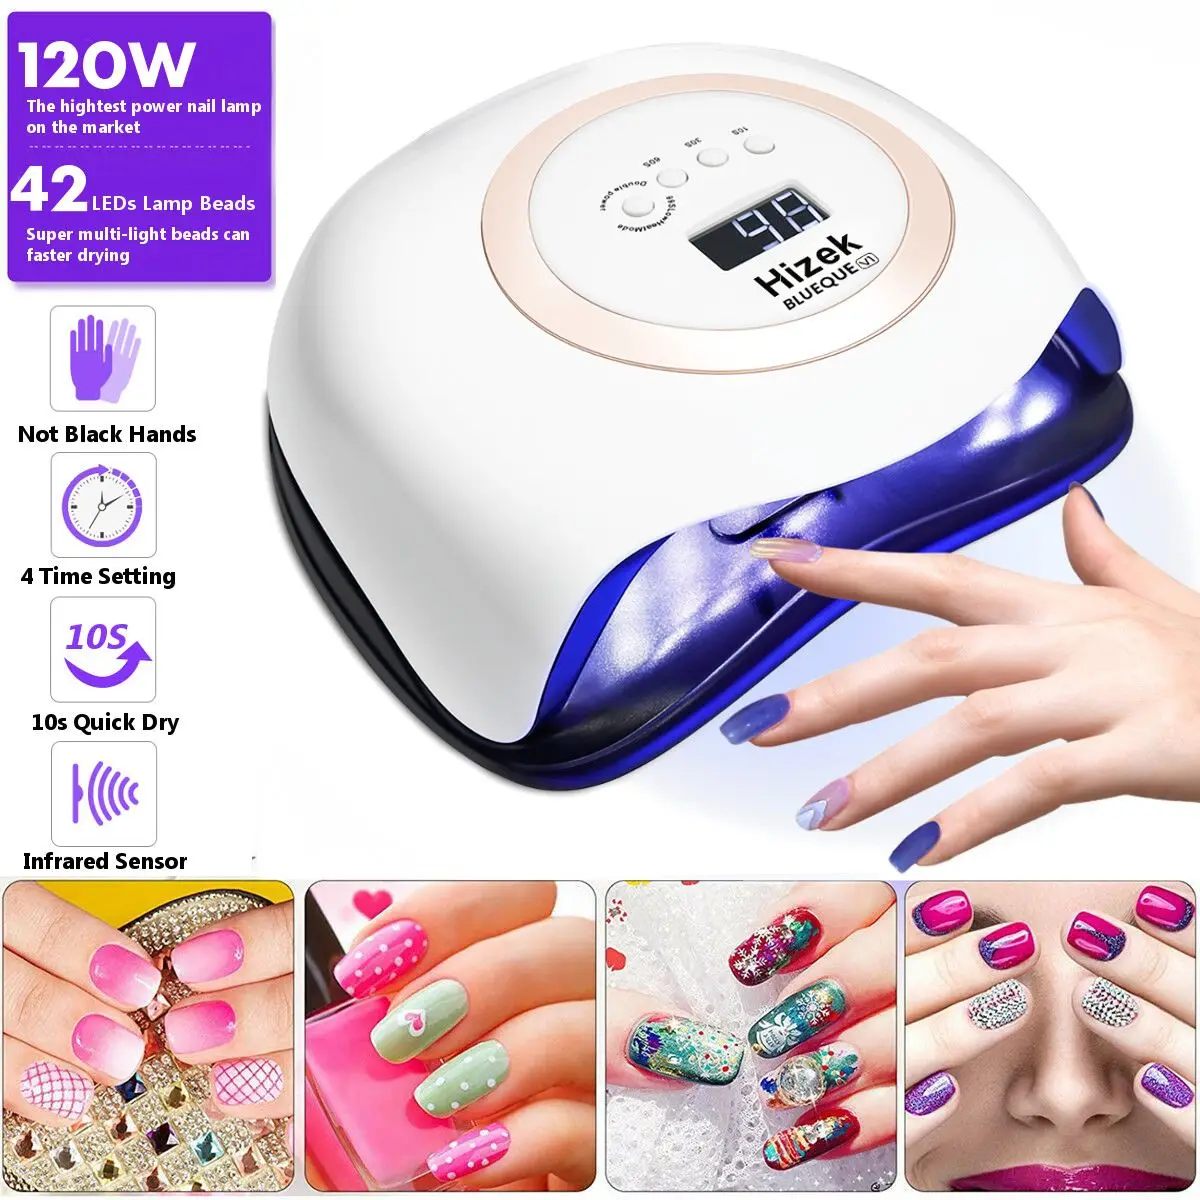 84W UV LED Nail Lamp Nail Dryer 42 LED Curing Light Gel Polish Electric Manicure  Machine Professional for Nail Art Home Salon|Nail Dryers| - AliExpress